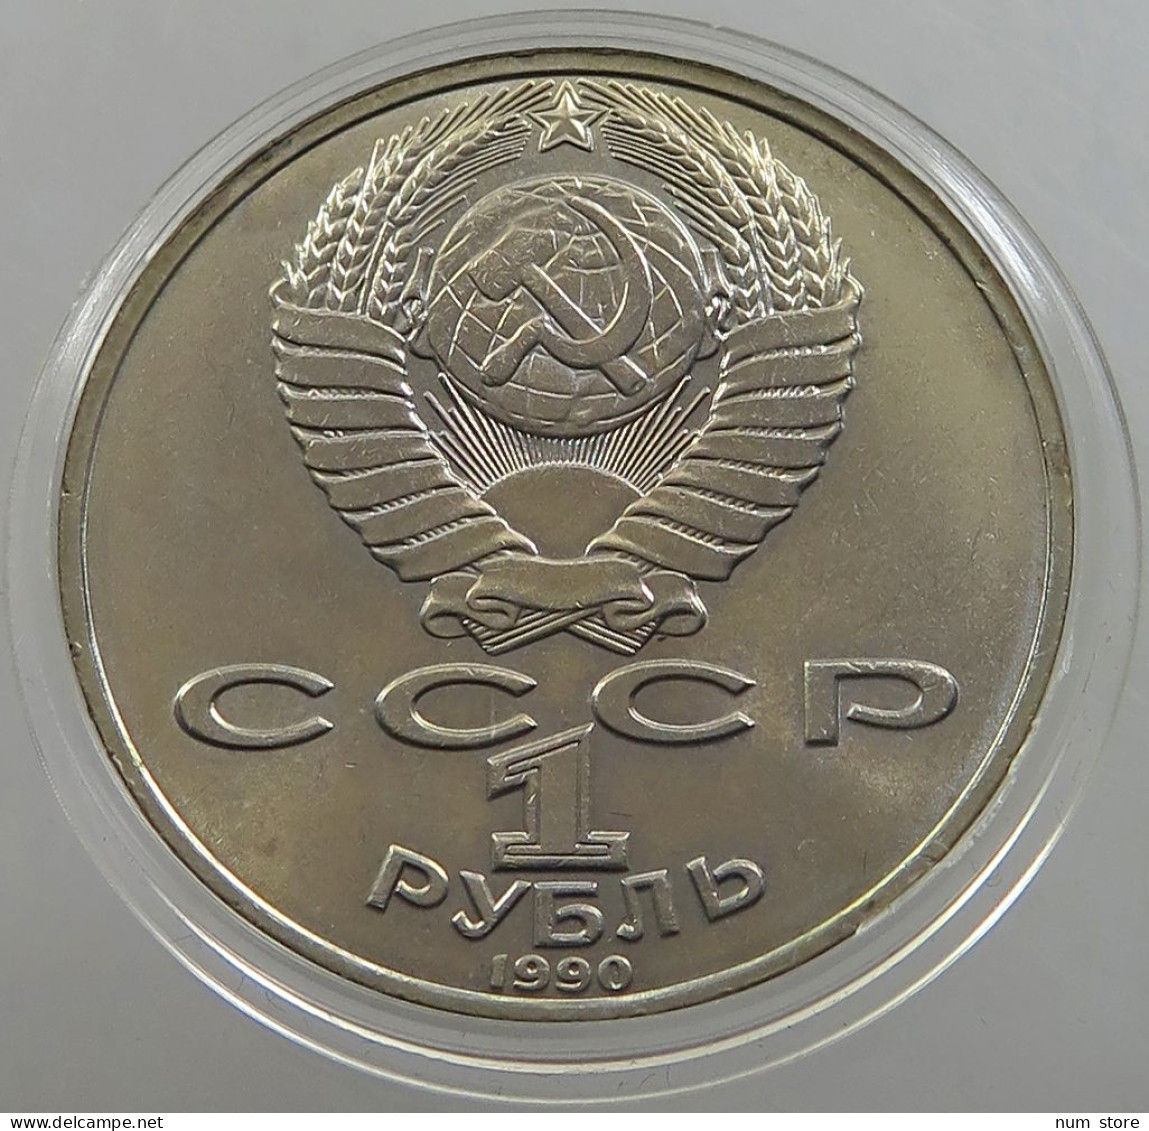 RUSSIA USSR 1 ROUBLE 1990 TSCHECHOW #sm14 0557 - Rusland